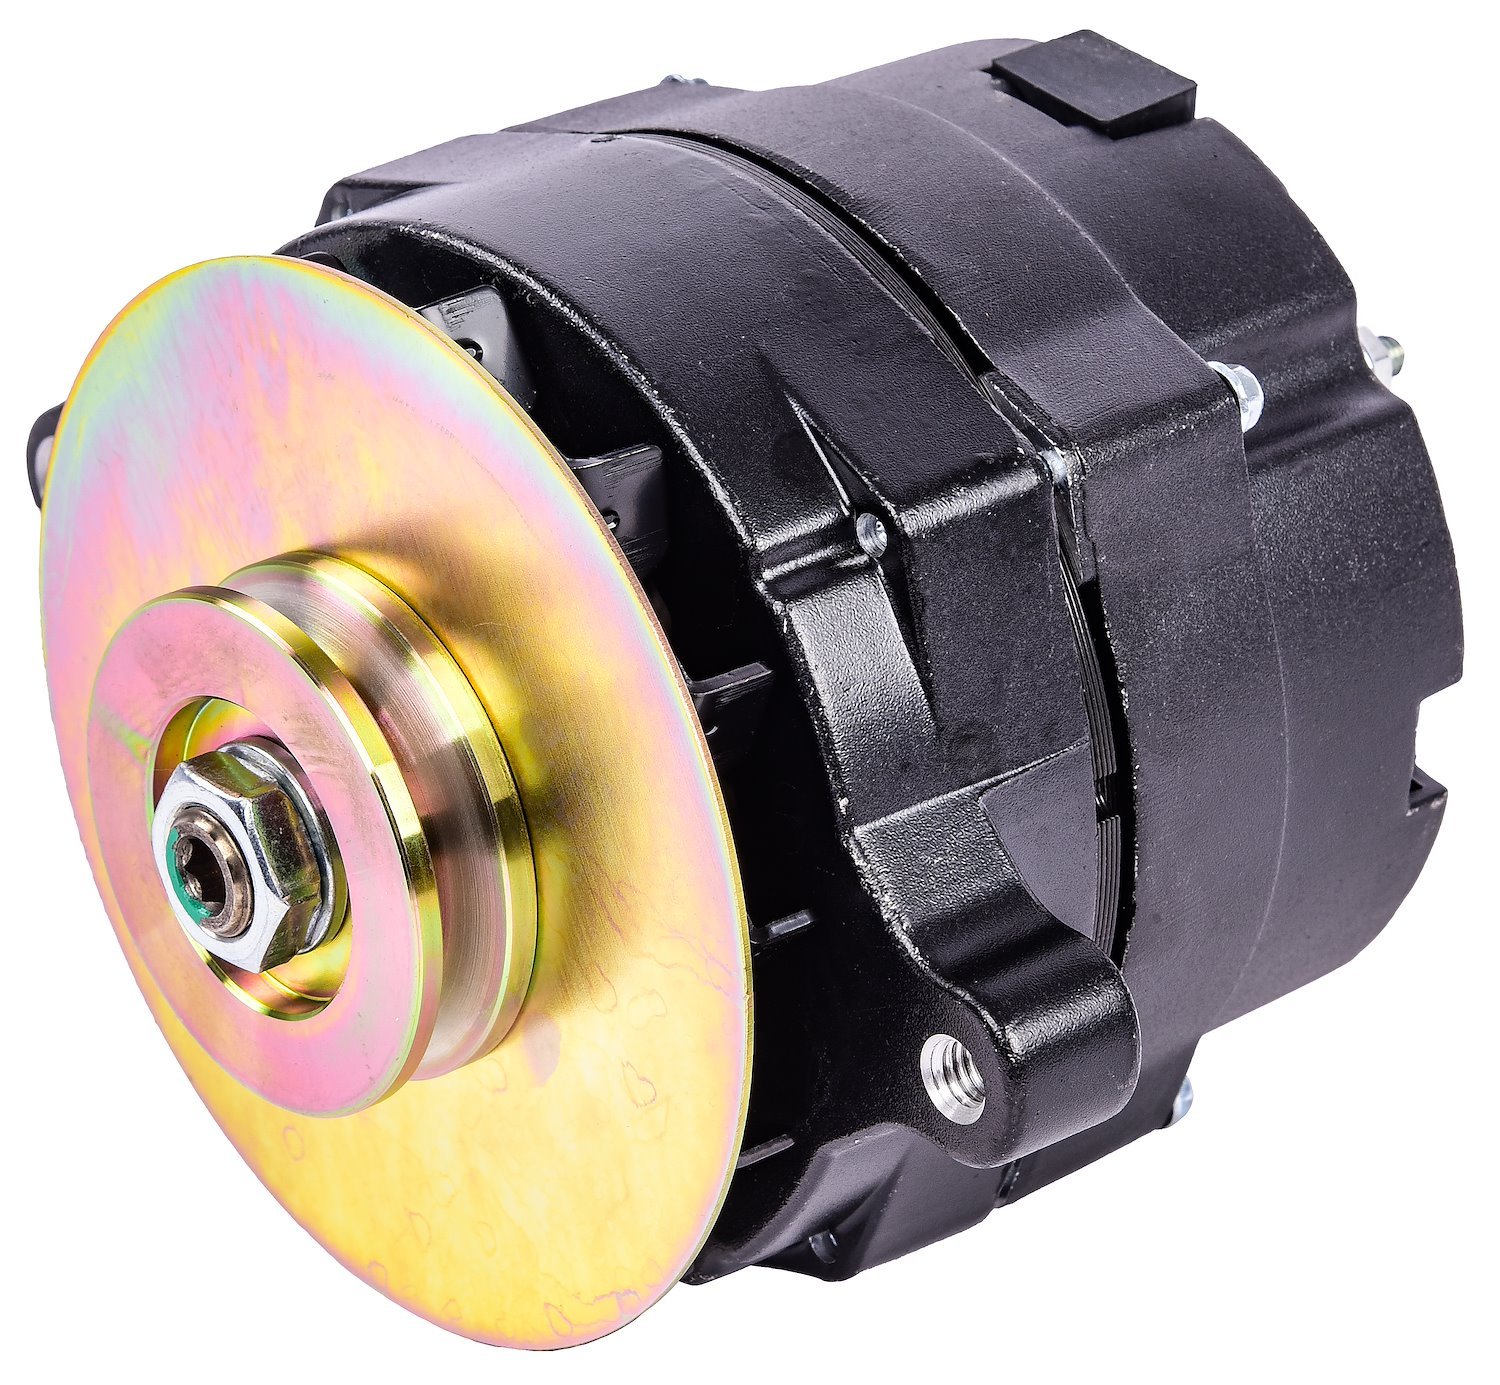 Ford 1-Wire Alternator, 100 amp Output with V-Belt Pulley [Black Finish]